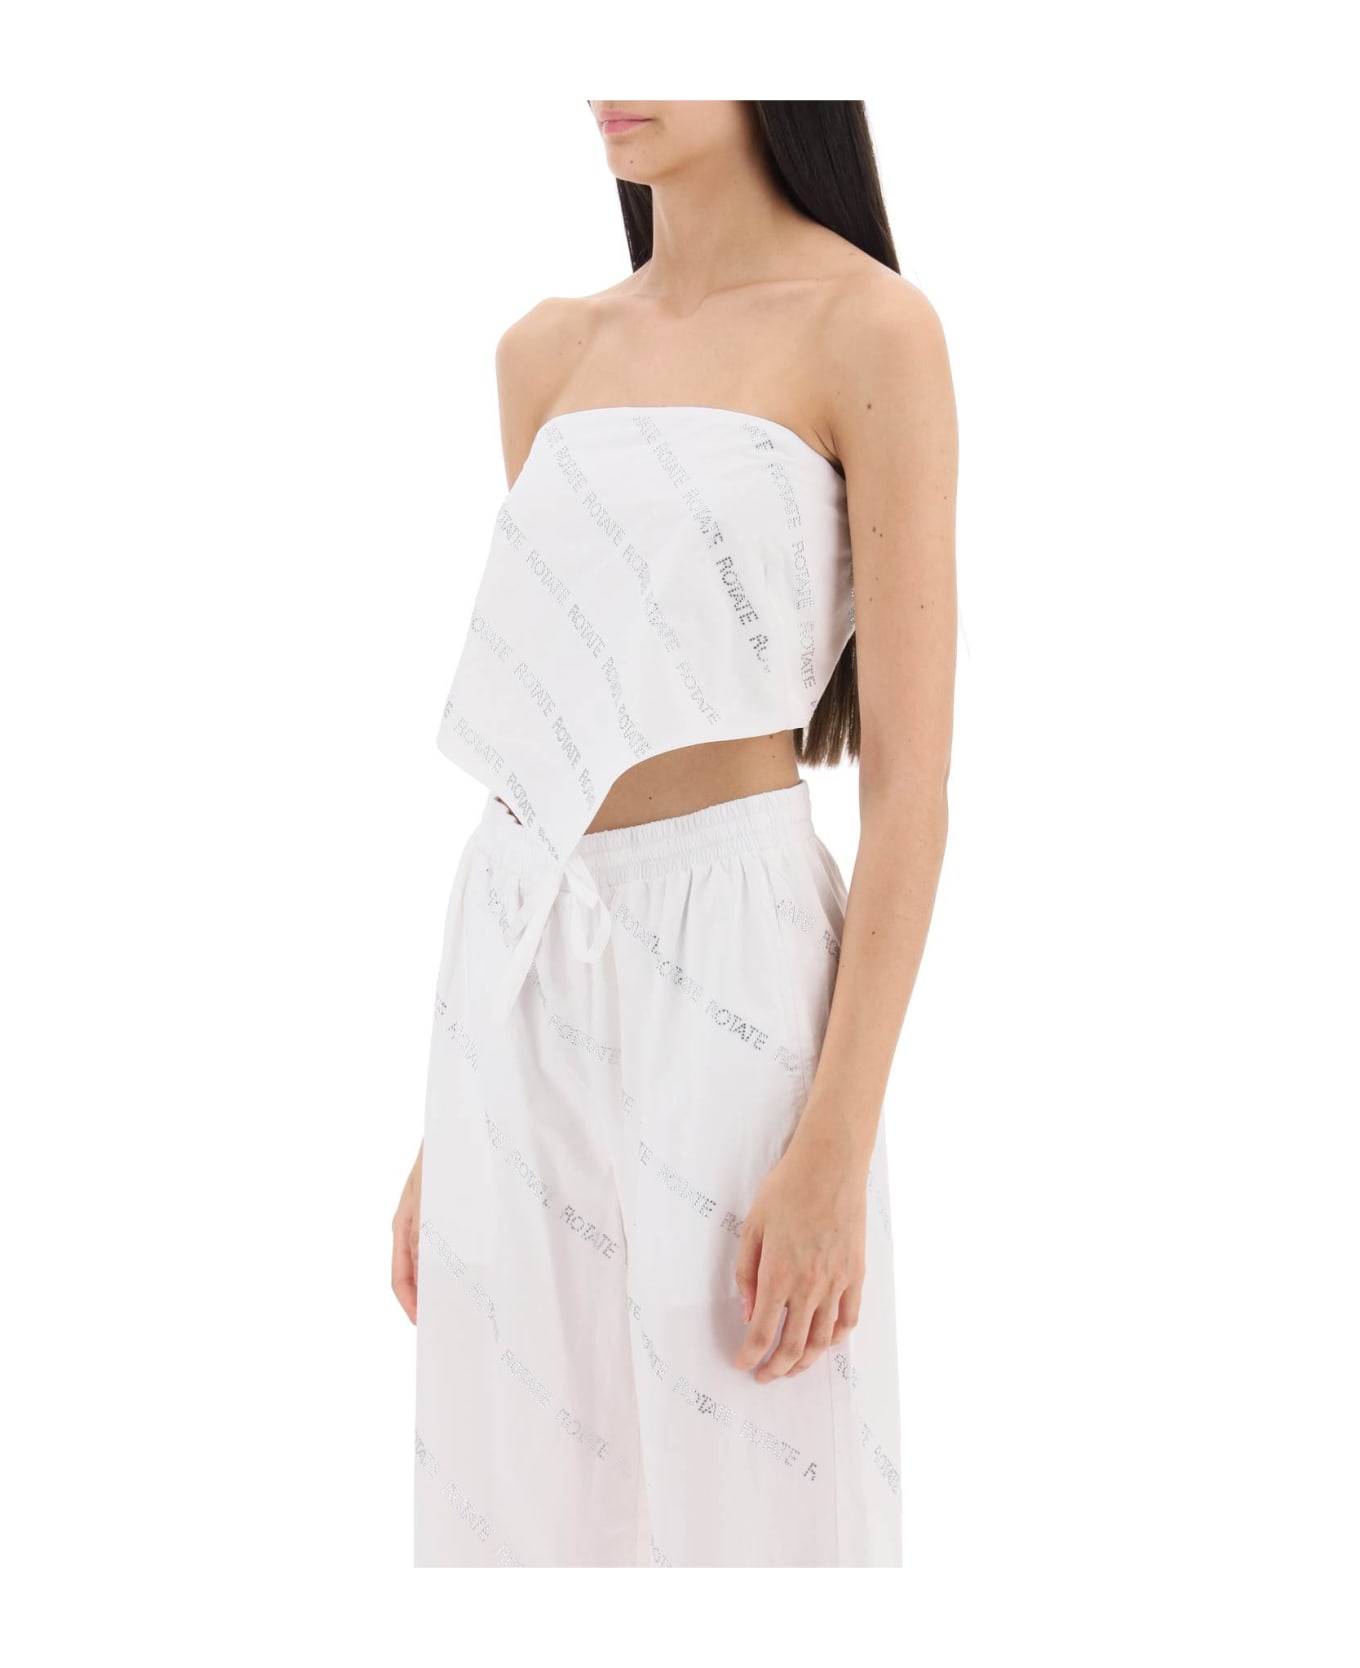 Rotate by Birger Christensen Cropped Hankerchief Top With Crystal Logo All-over - BRIGHT WHITE COMB (White)